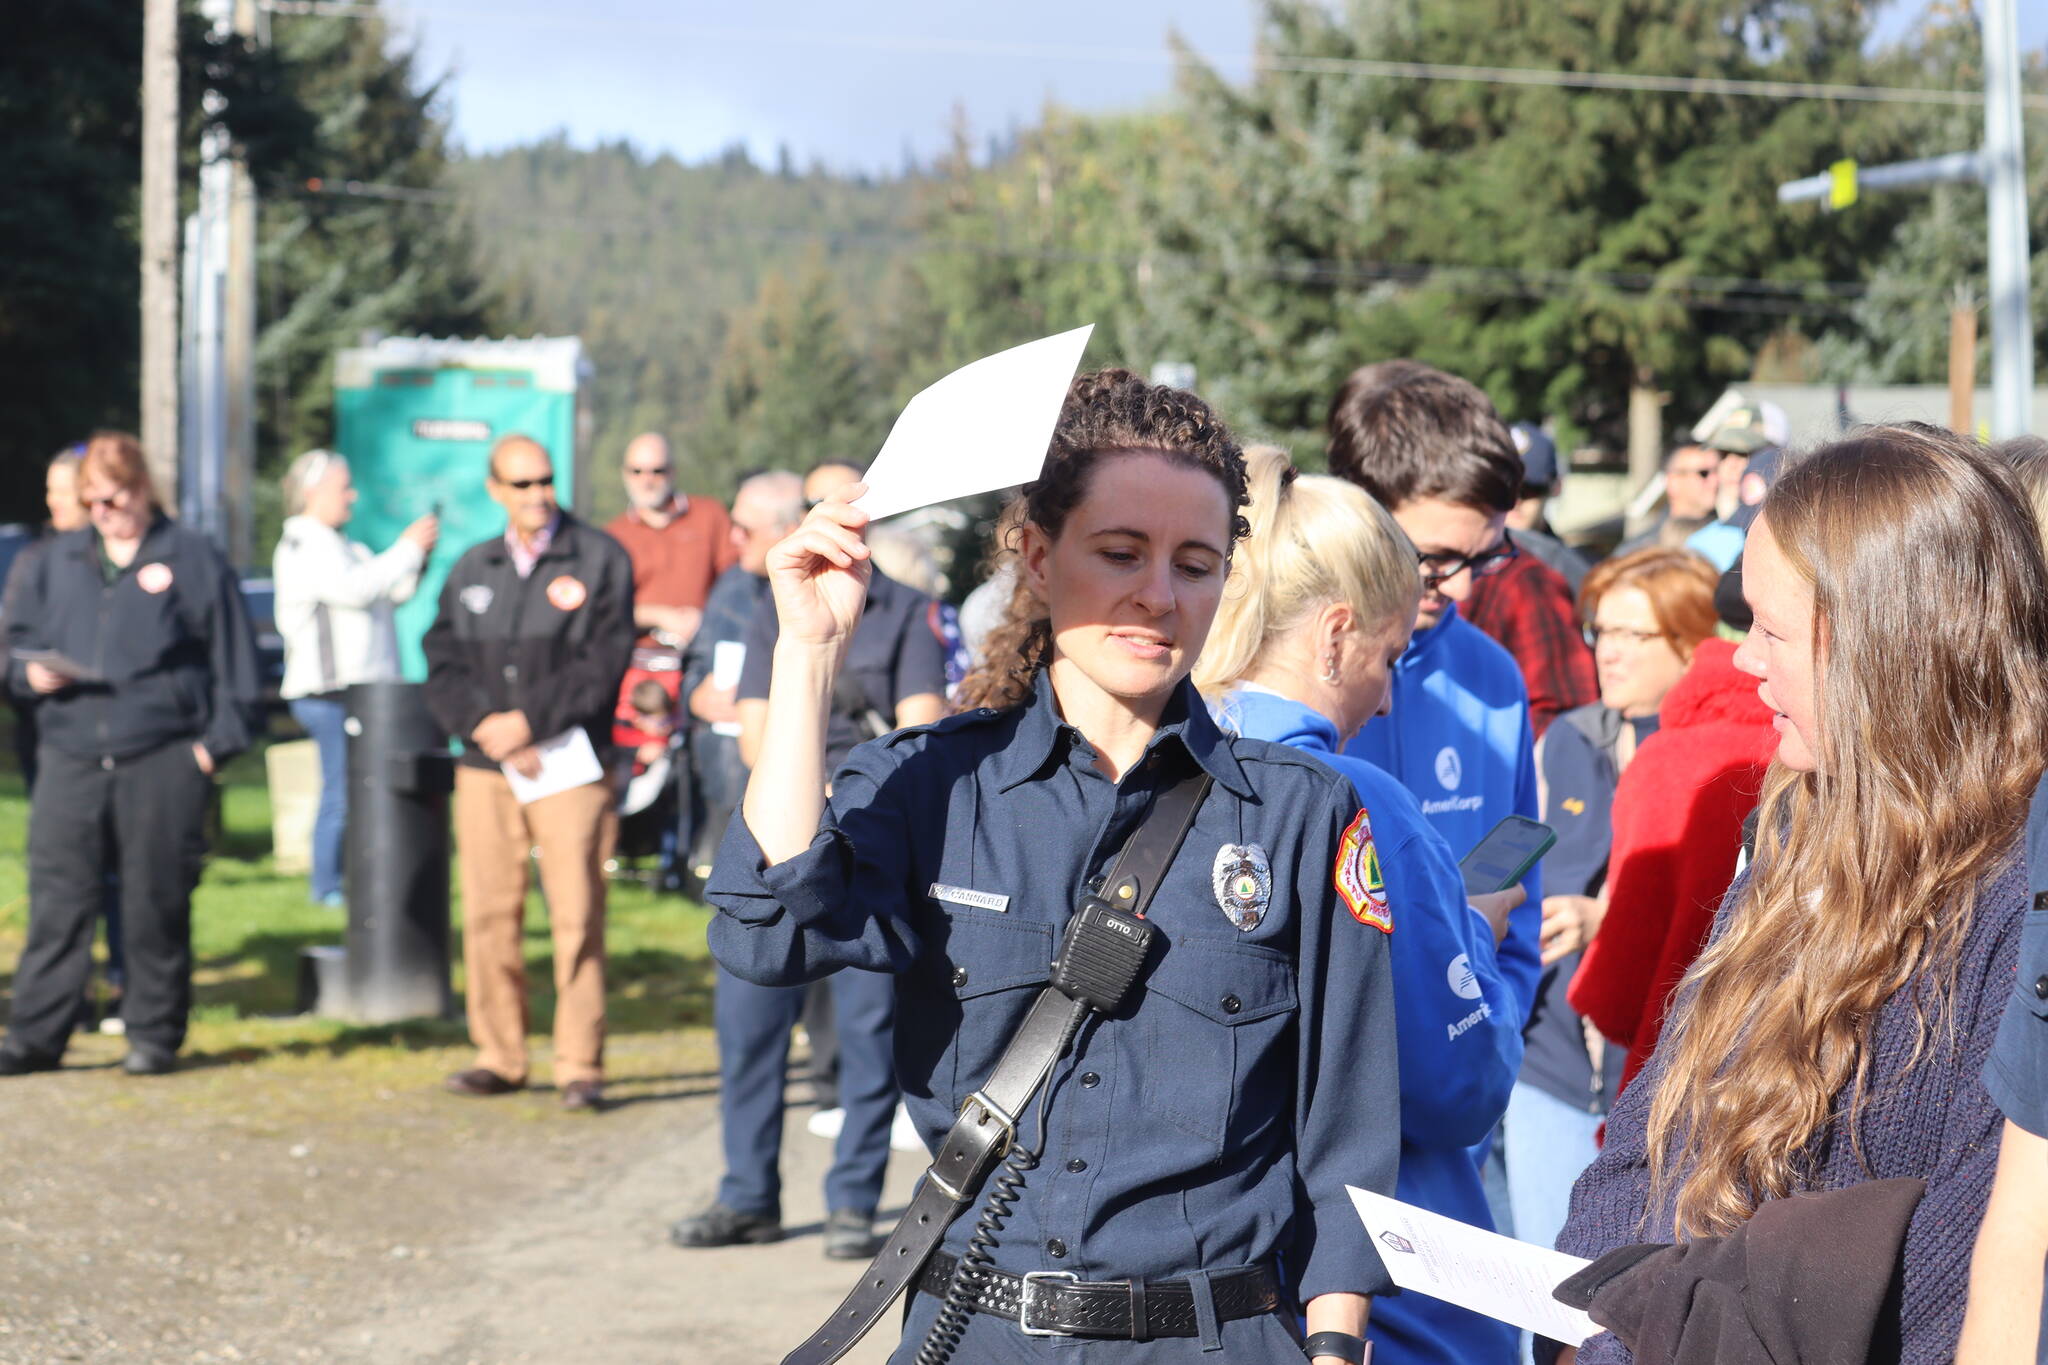 From Juneau’s first responders to residents, many attended to pay respects during Sunday morning’s ceremony at the 9/11 Memorial at Riverside Rotary Park. (Jonson Kuhn / Juneau Empire)